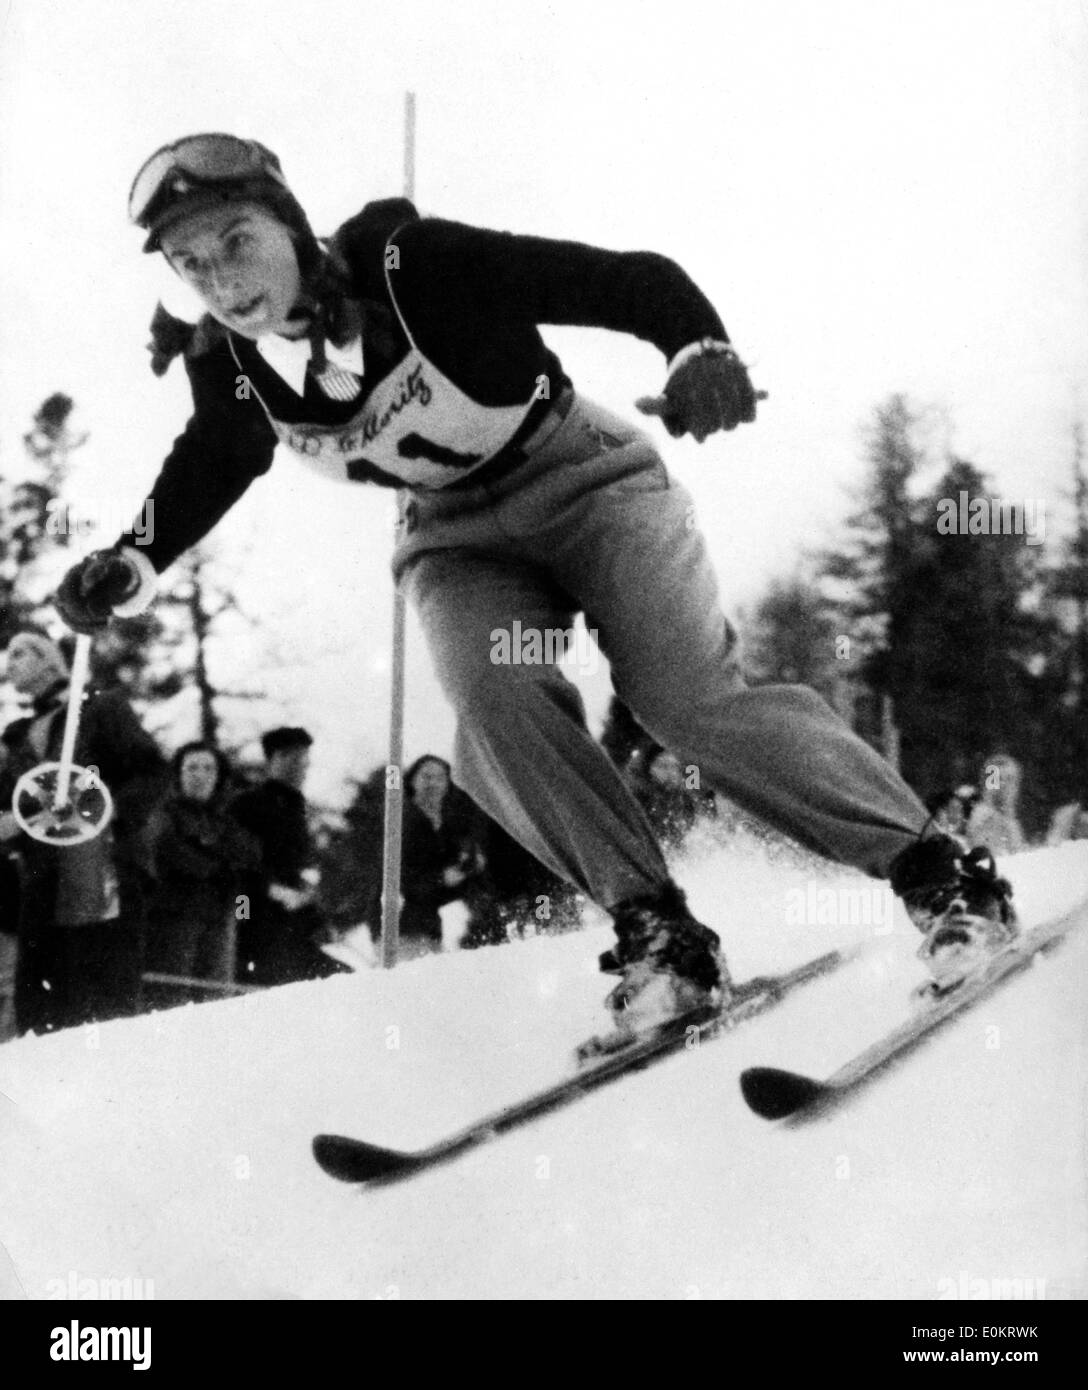 Skier Gretchen Fraser competes in Olympics Stock Photo